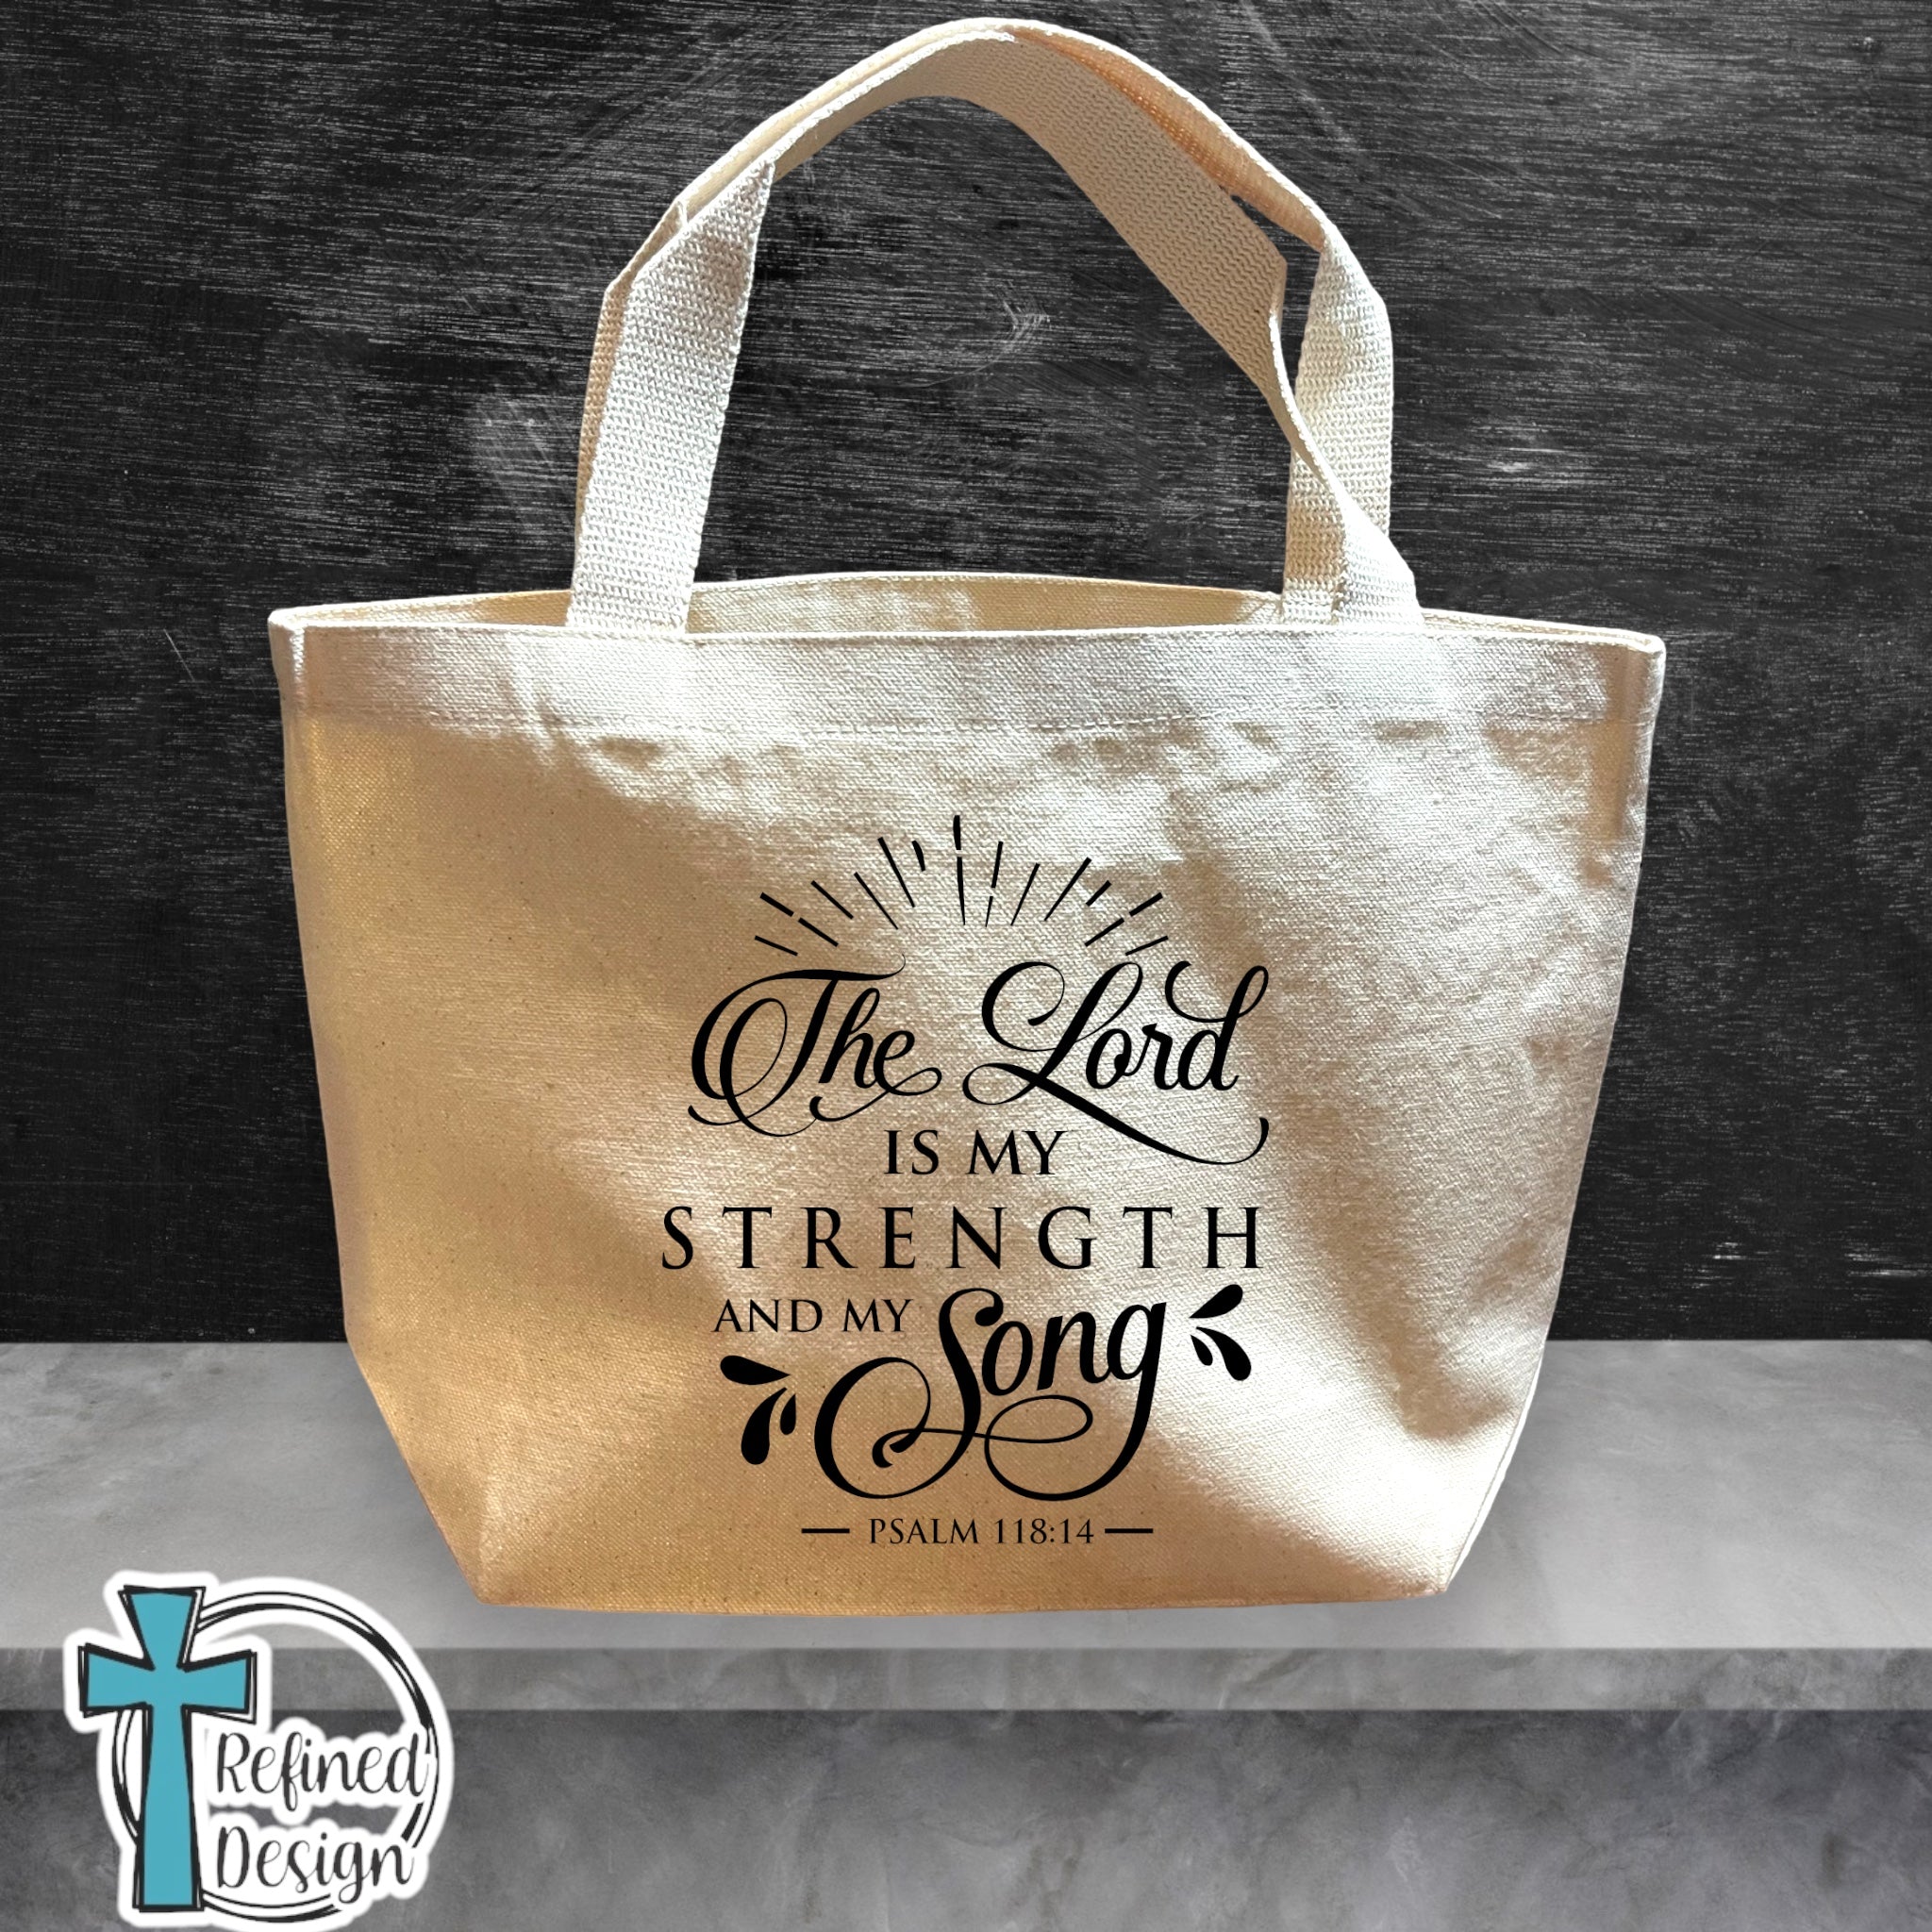 Buy Personalized Bible Bag, Available in 7 Colors Online in India - Etsy